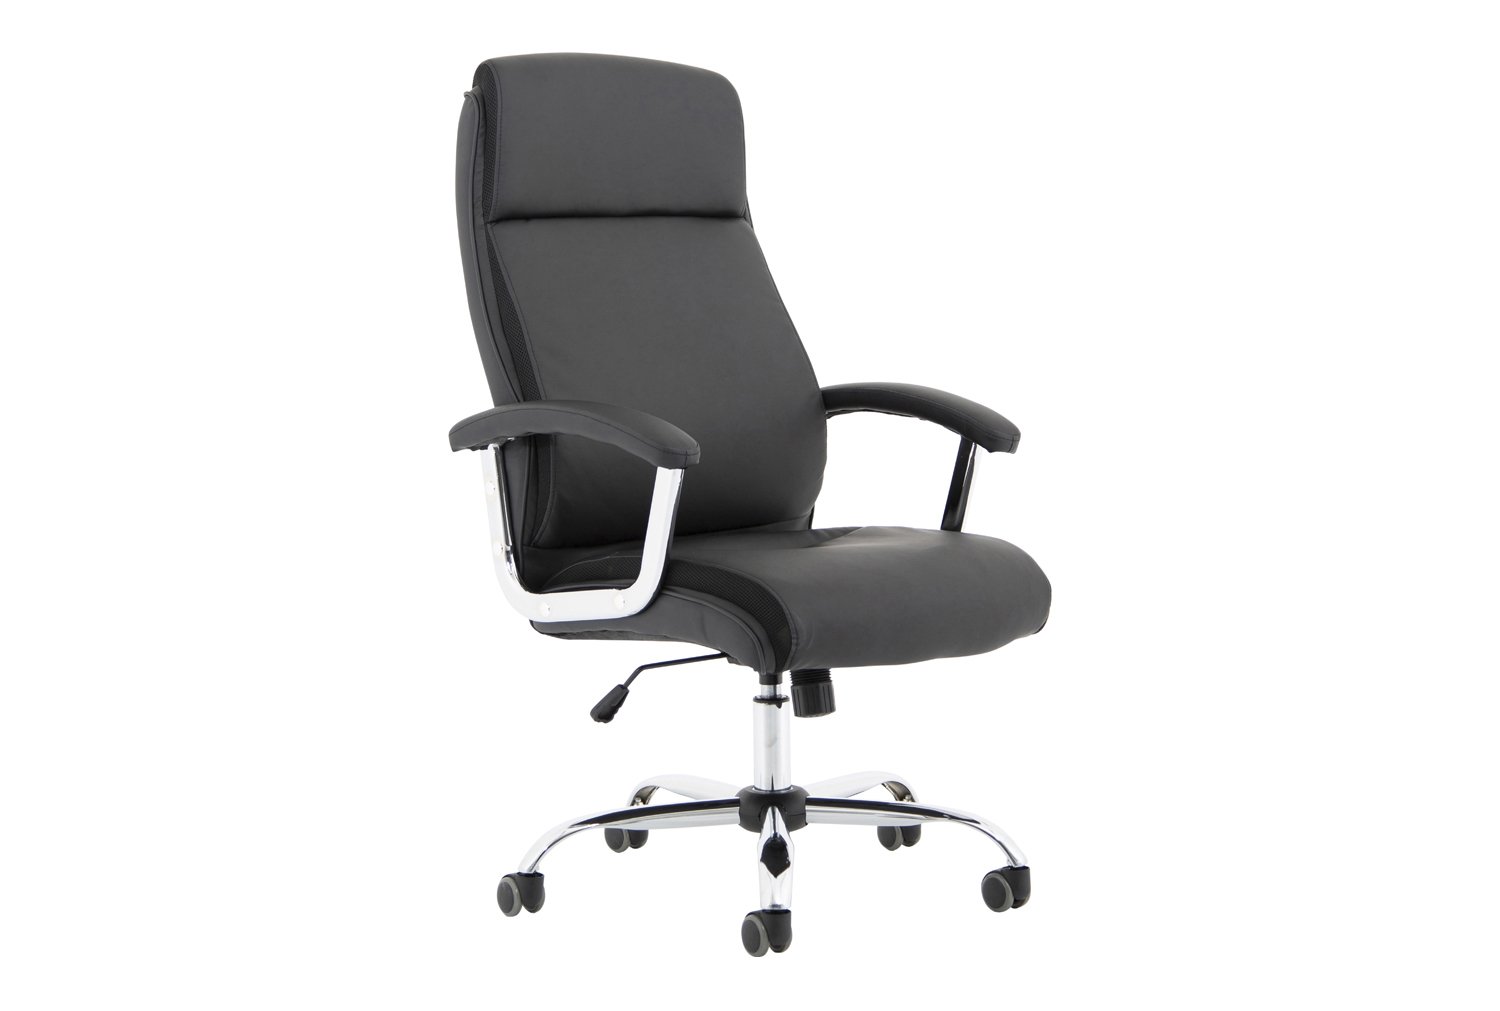 Dommett Executive Black Leather Office Chair, Fully Installed